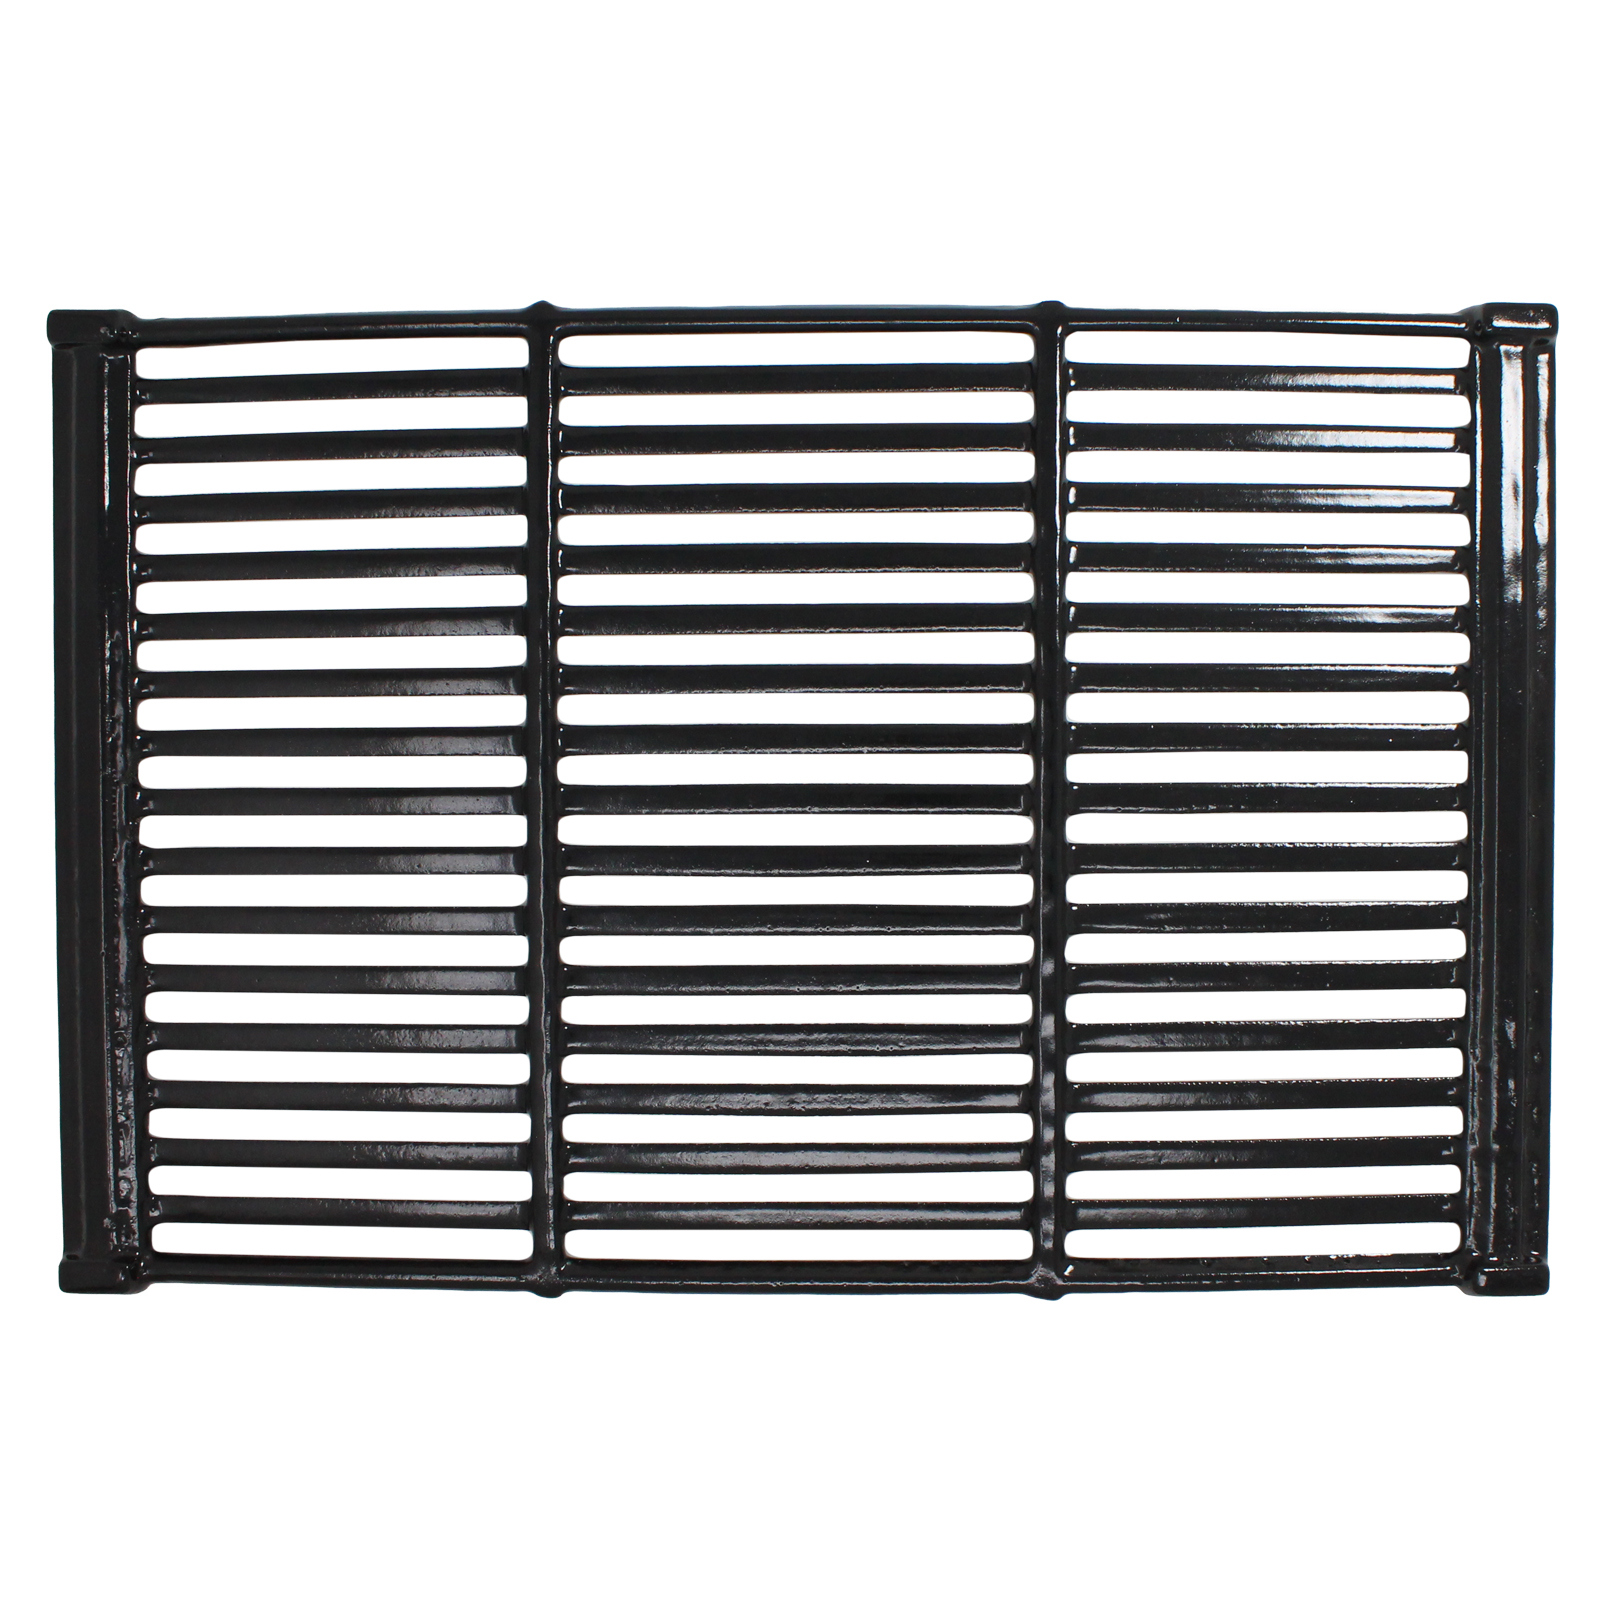 BBQ Grill Cooking Grates Replacement Parts for Grill Zone 6305 (810-6305-T) - Compatible Barbeque Porcelain Enameled Cast Iron Grid 19" - image 2 of 4